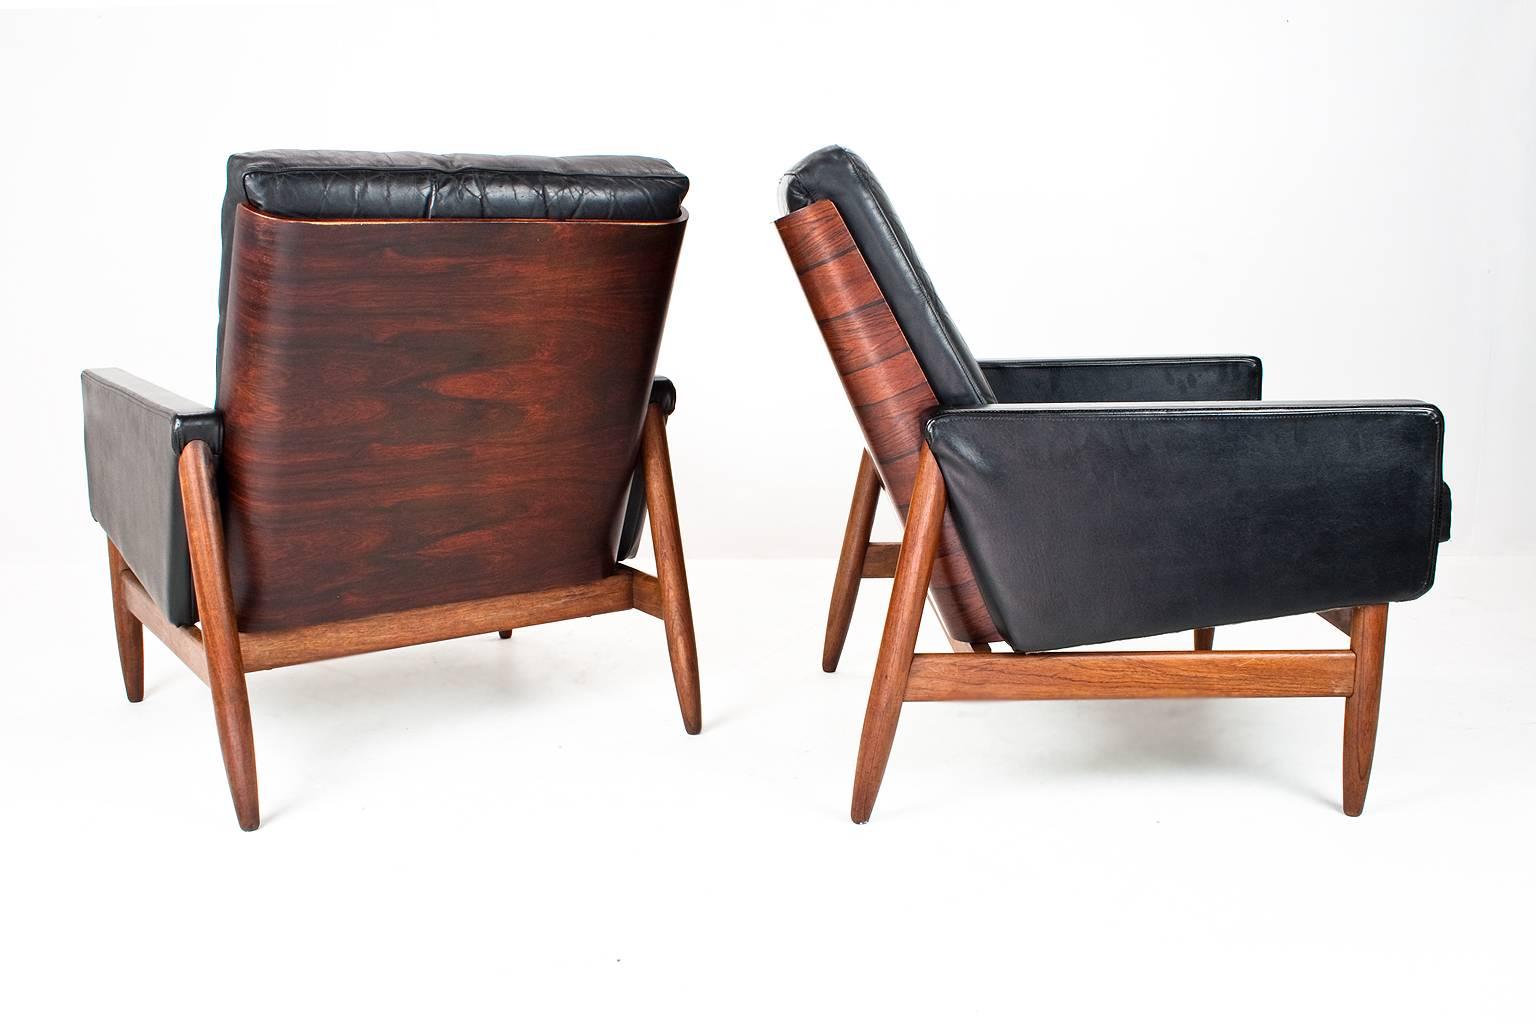 Oiled 1950s Set of Scandinavian Mid-Century Leather, Teak and Rosewood Lounge Chairs